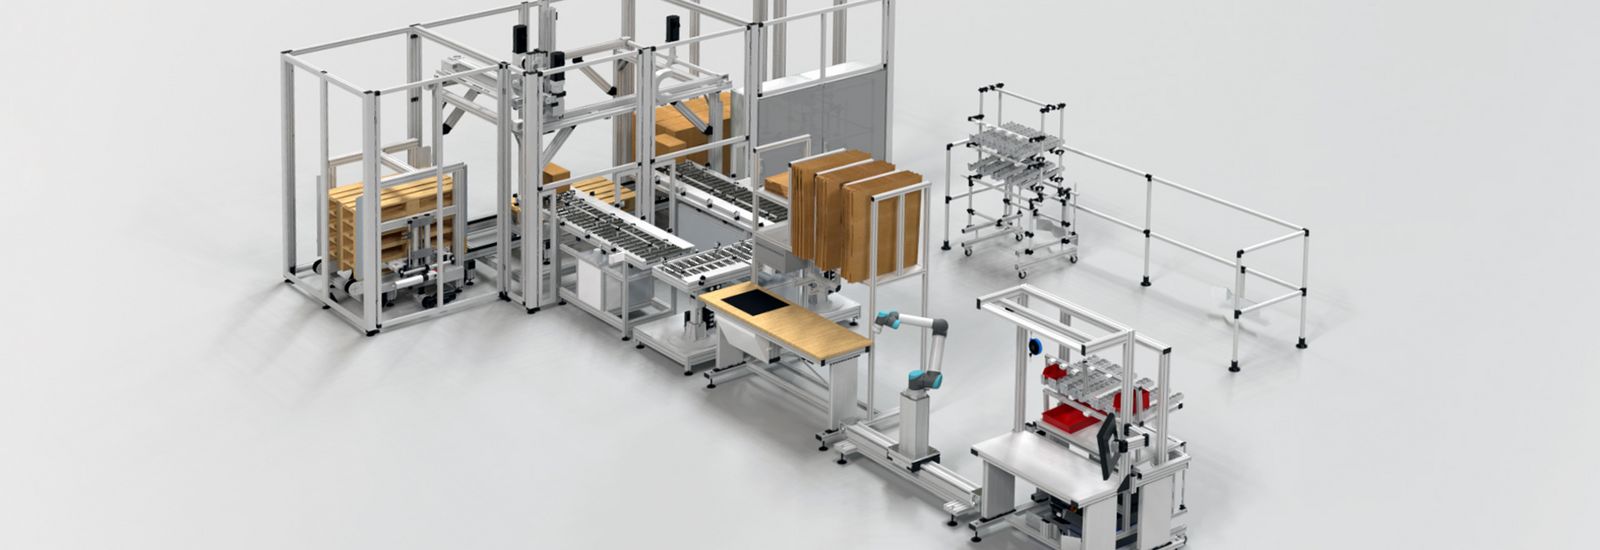 We develop, manufacture and install the following for you: machine frames, safety fences, height adjustable work tables, handling systems ... all from a single source